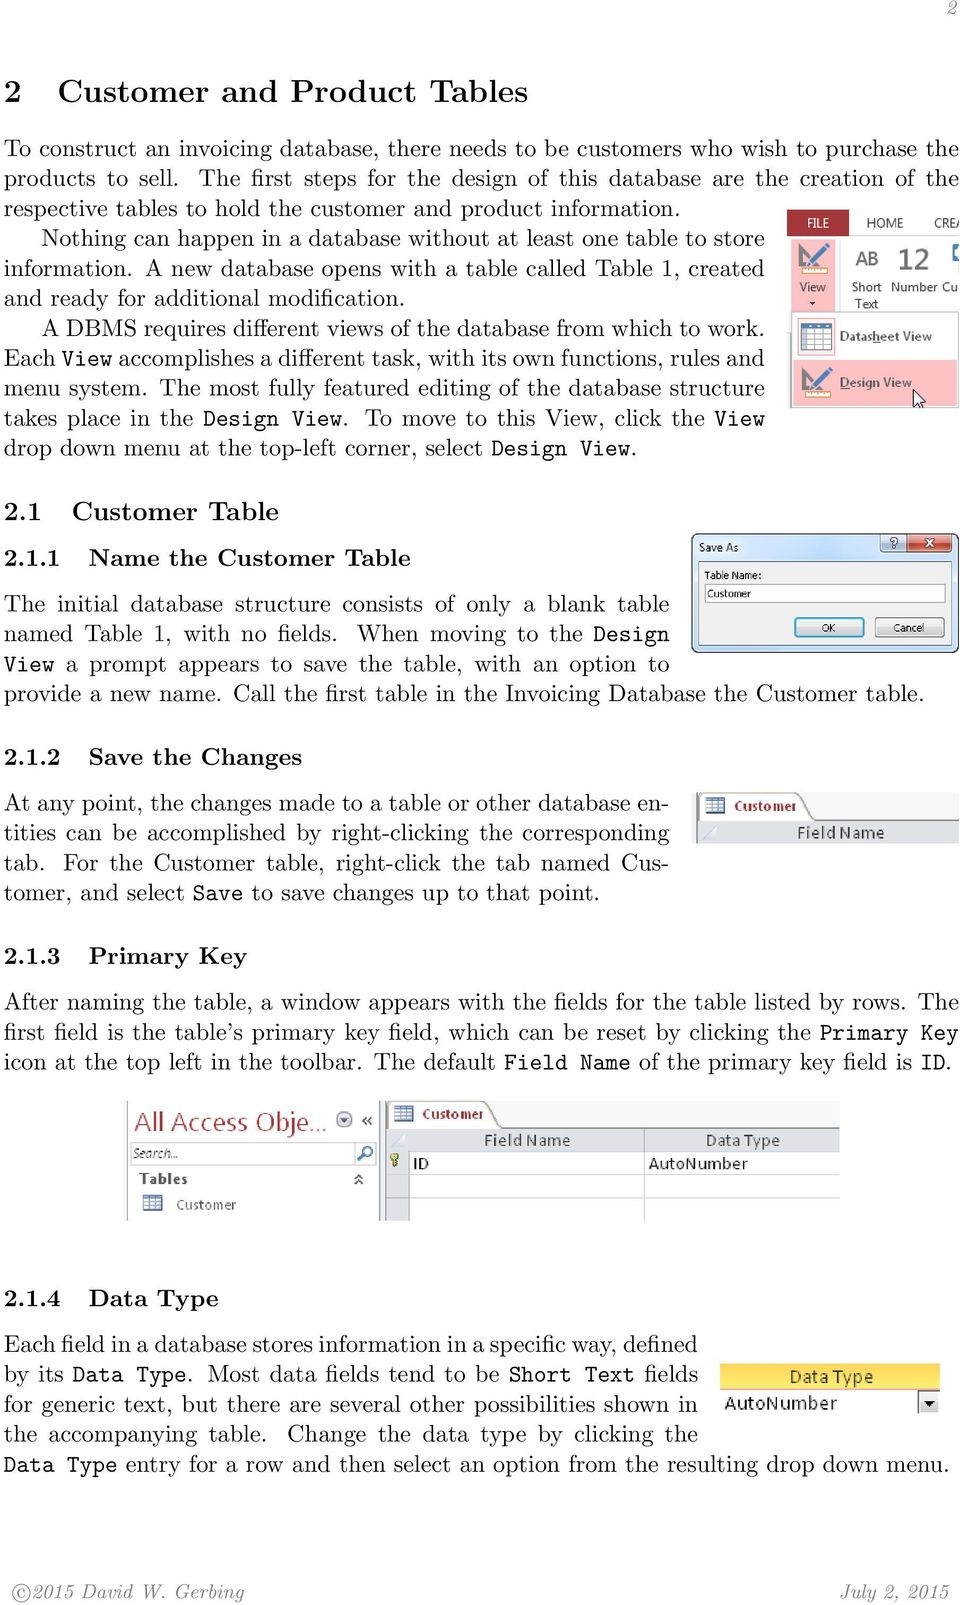 Nothing can happen in a database without at least one table to store information. A new database opens with a table called Table 1, created and ready for additional modification.